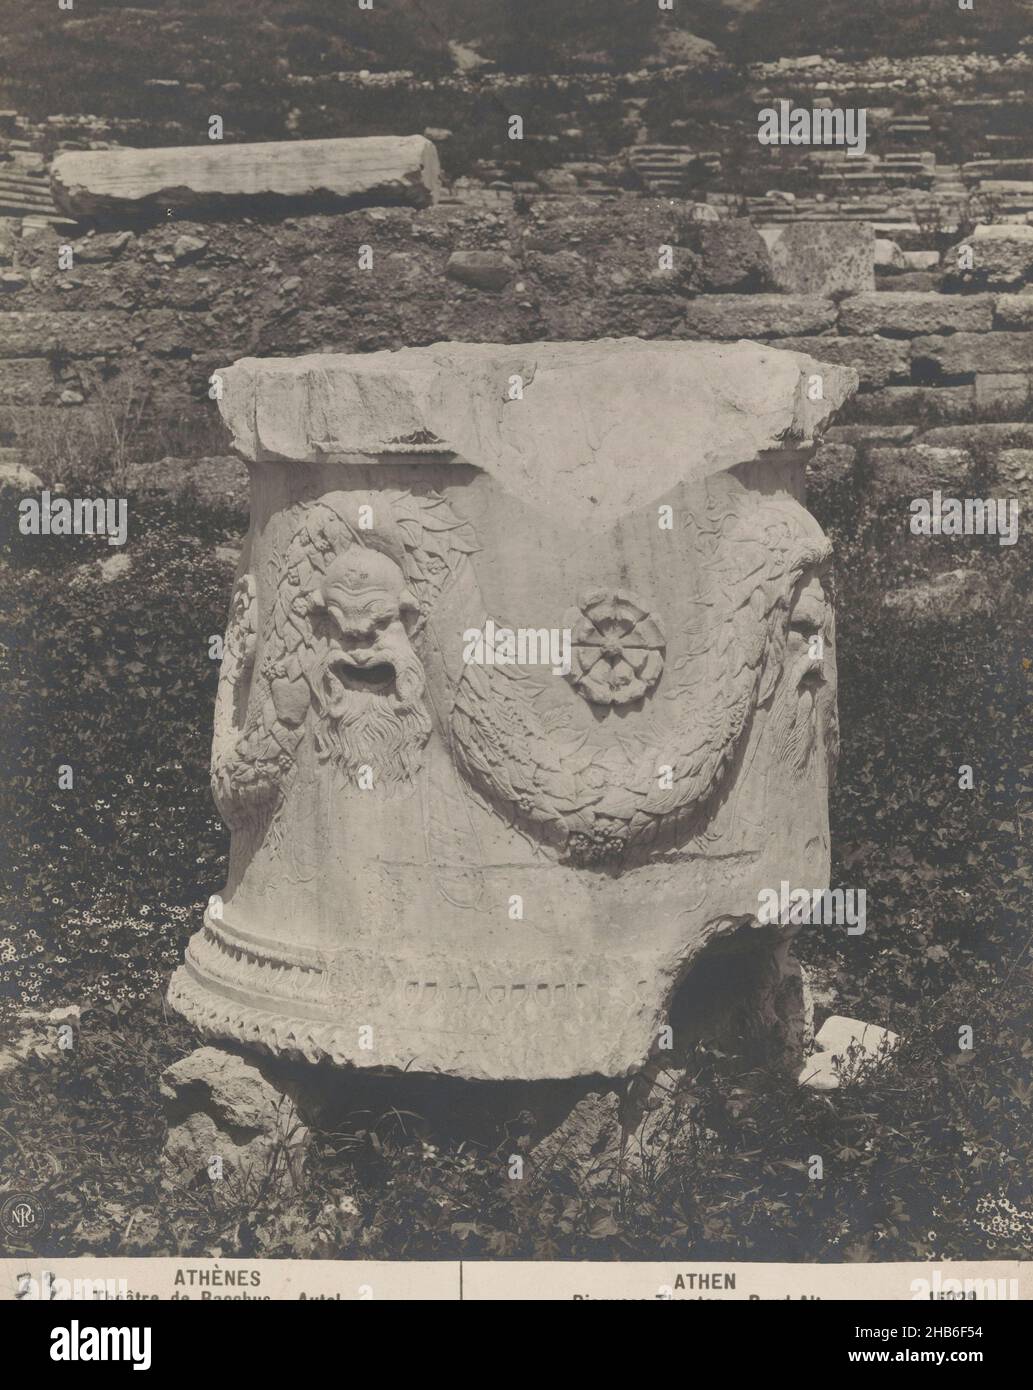 Altar of the Dionysus Theatre at Athens, ATHÈNES Théâtre de Bacchus. Autel (title on object), ATHEN Dionysos Theatre. Rund-Altar (title on object), anonymous, publisher: Neue Photographische Gesellschaft (mentioned on object), Athene, c. 1875 - c. 1900, photographic support, gelatin silver print, height 244 mm × width 190 mm Stock Photo